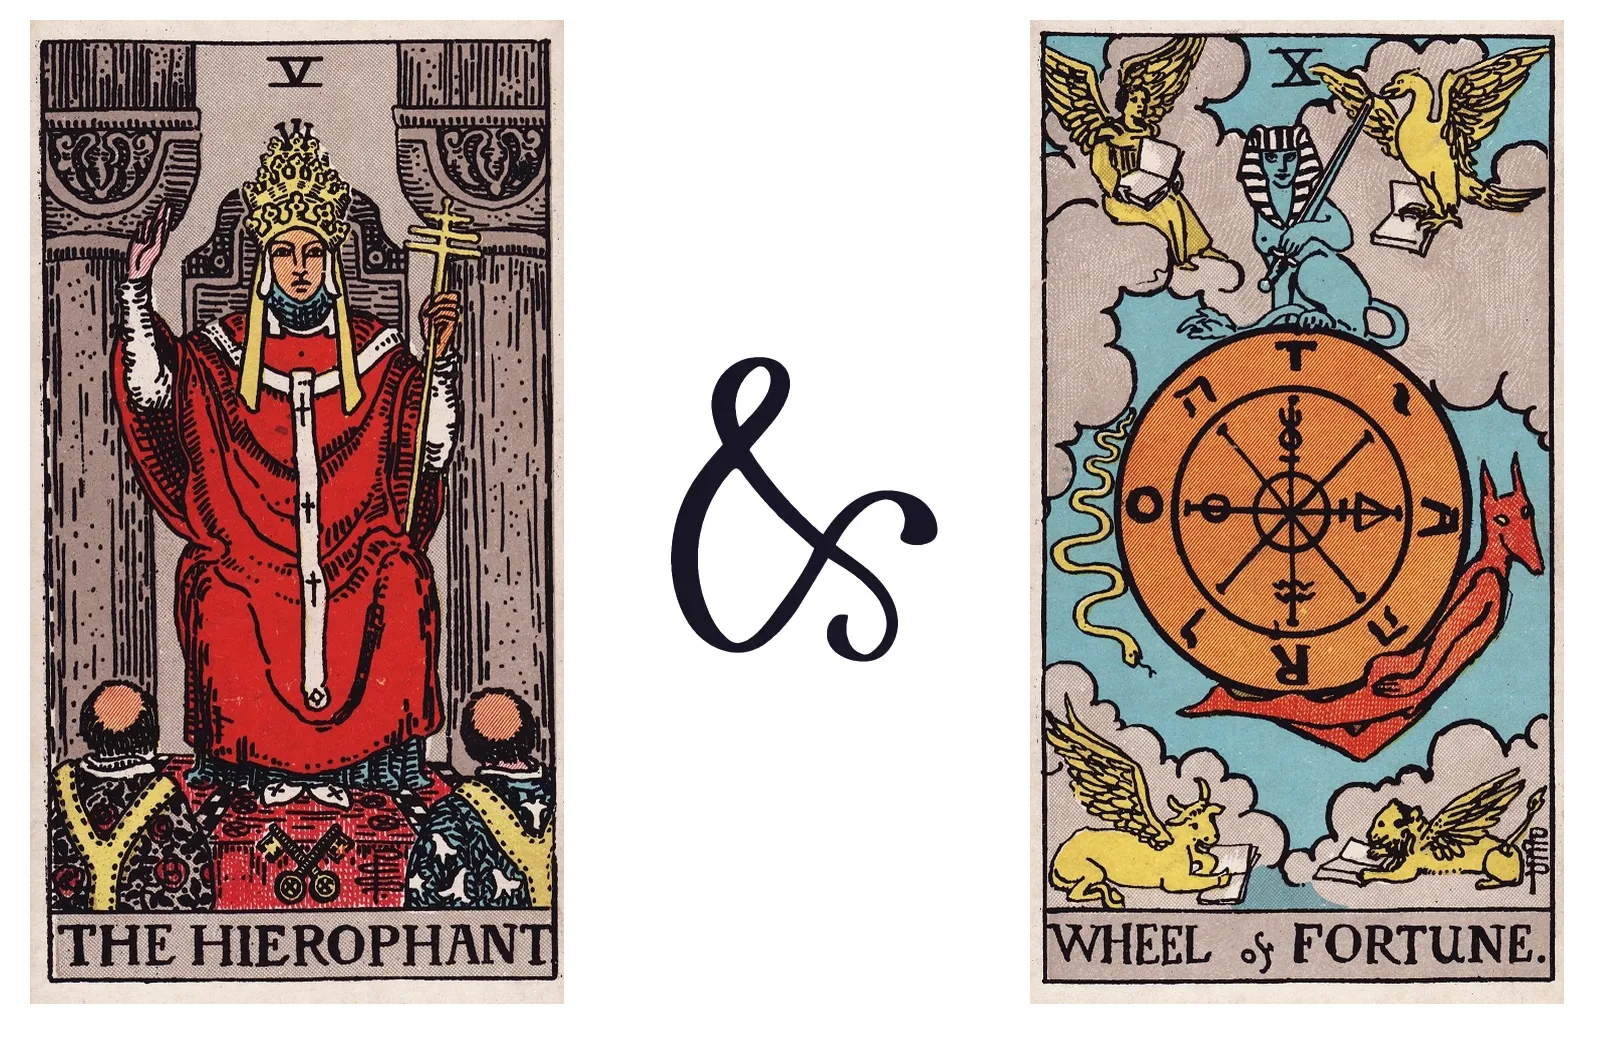 The Hierophant and Wheel of Fortune